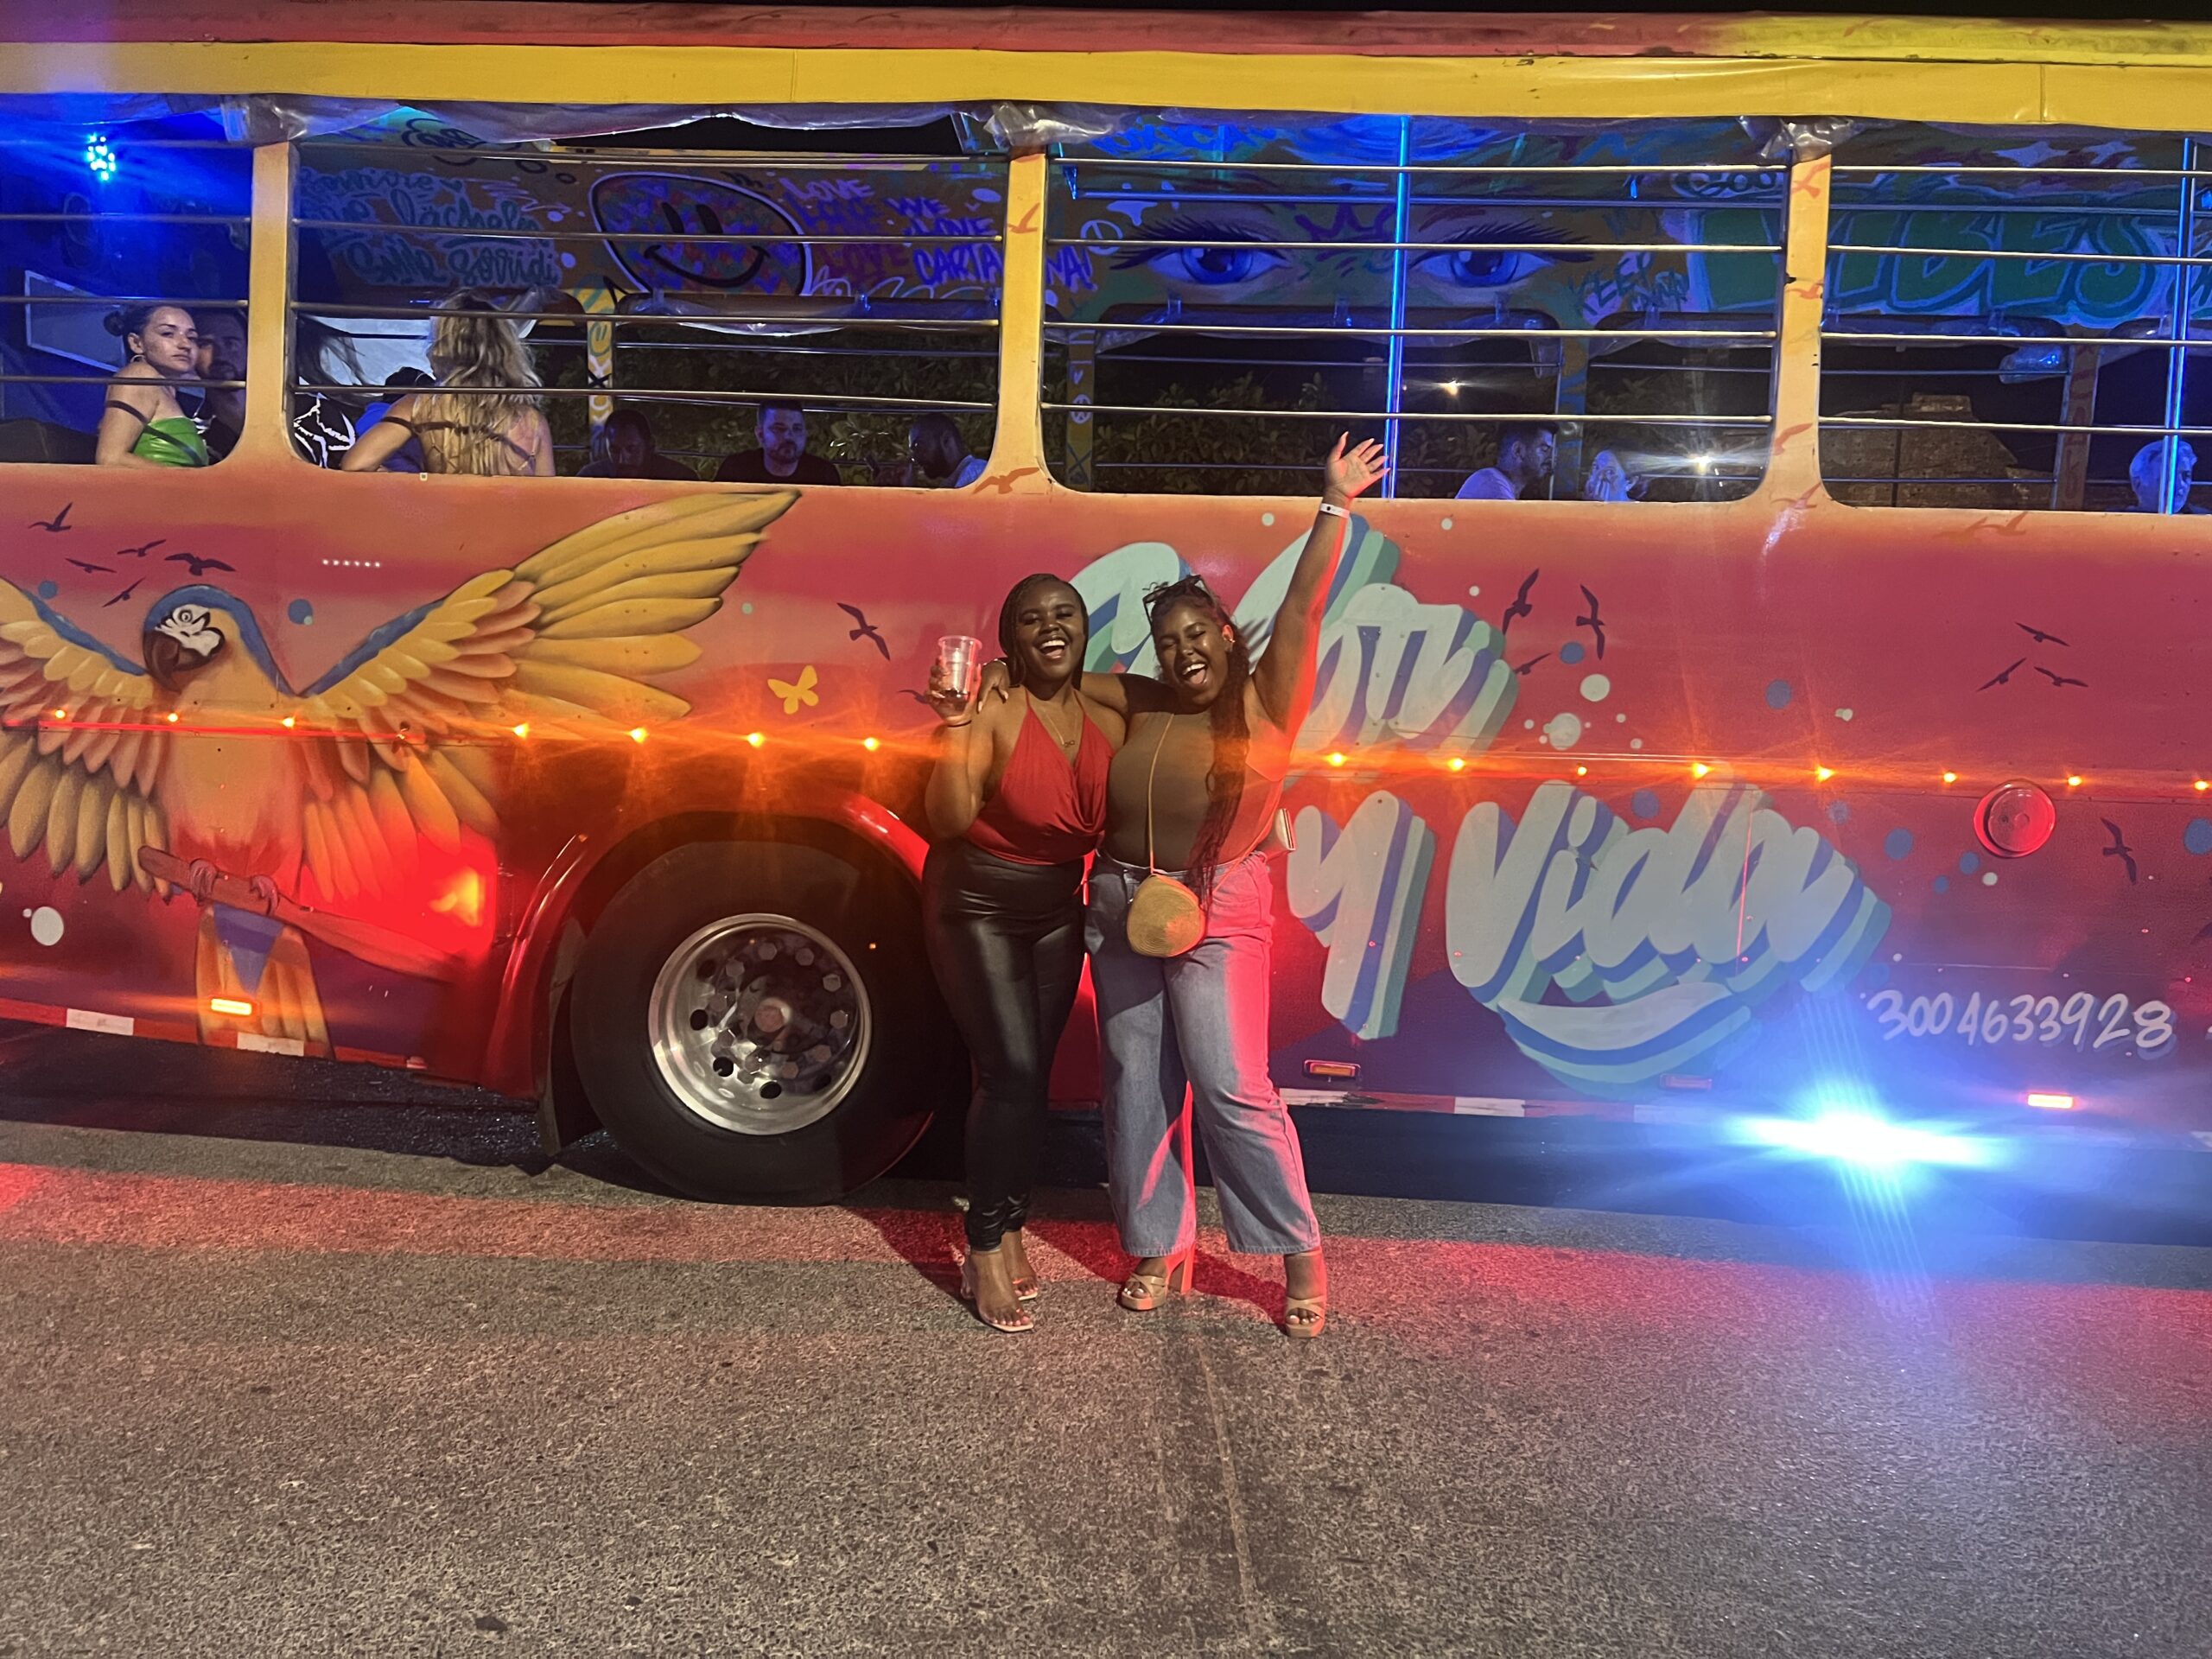 Christina Jane and her friend Shang in front of the Chiva Party Bus 